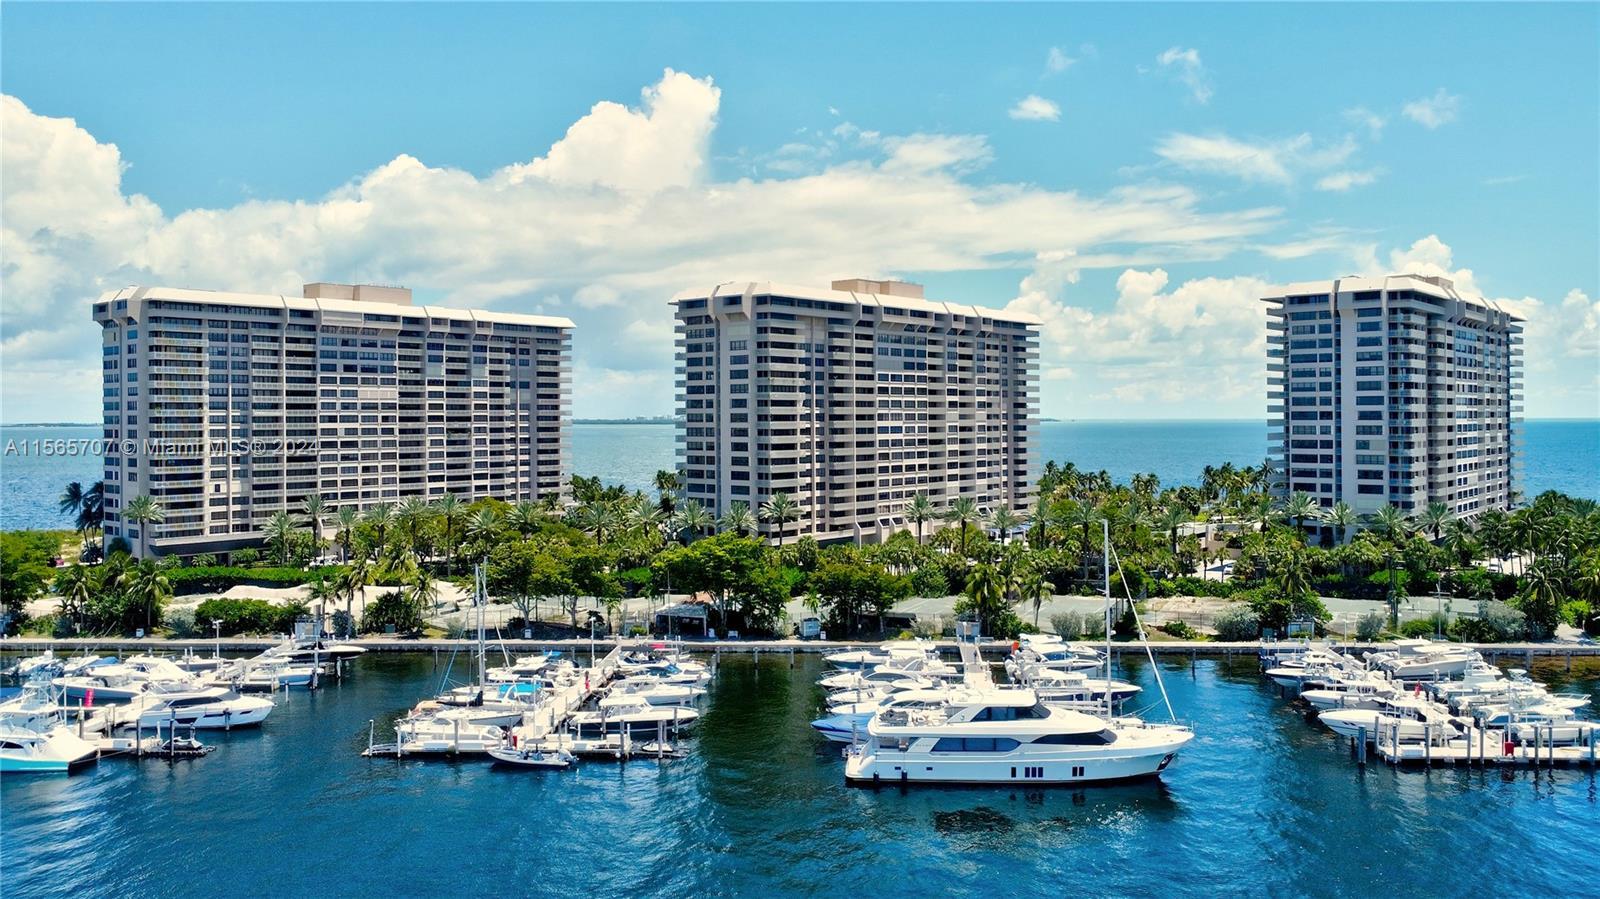 Fabulous spacious and inviting 01 line 3 bedroom apartment overlooking Biscayne Bay.  Over 2600 Sq.f